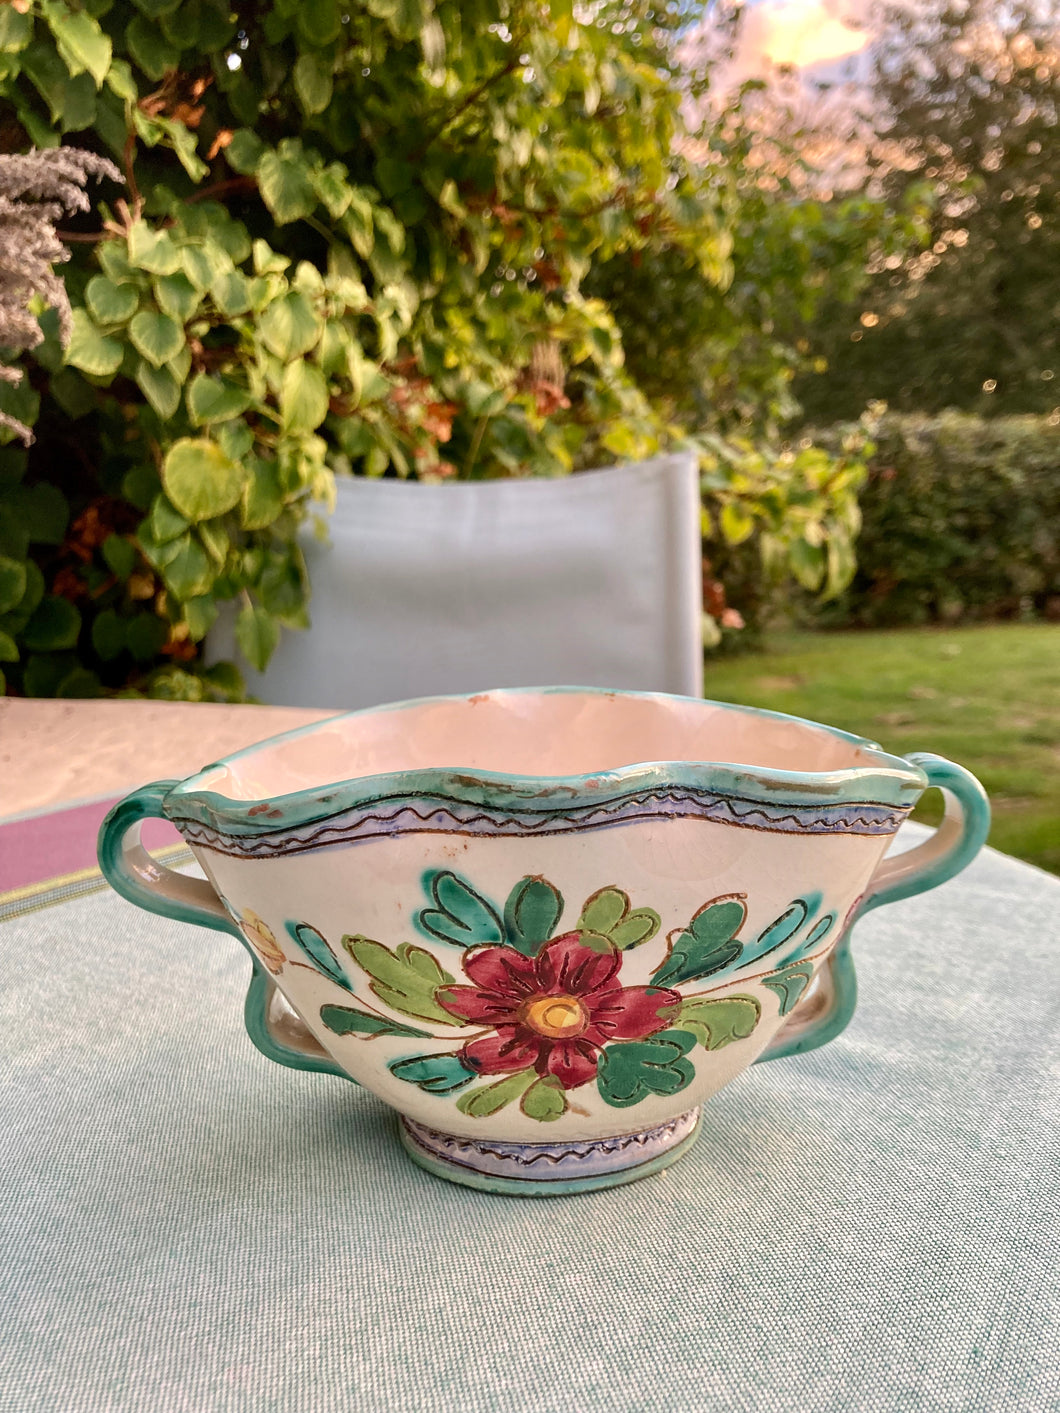 Italian floral mantle vase with turquoise trim